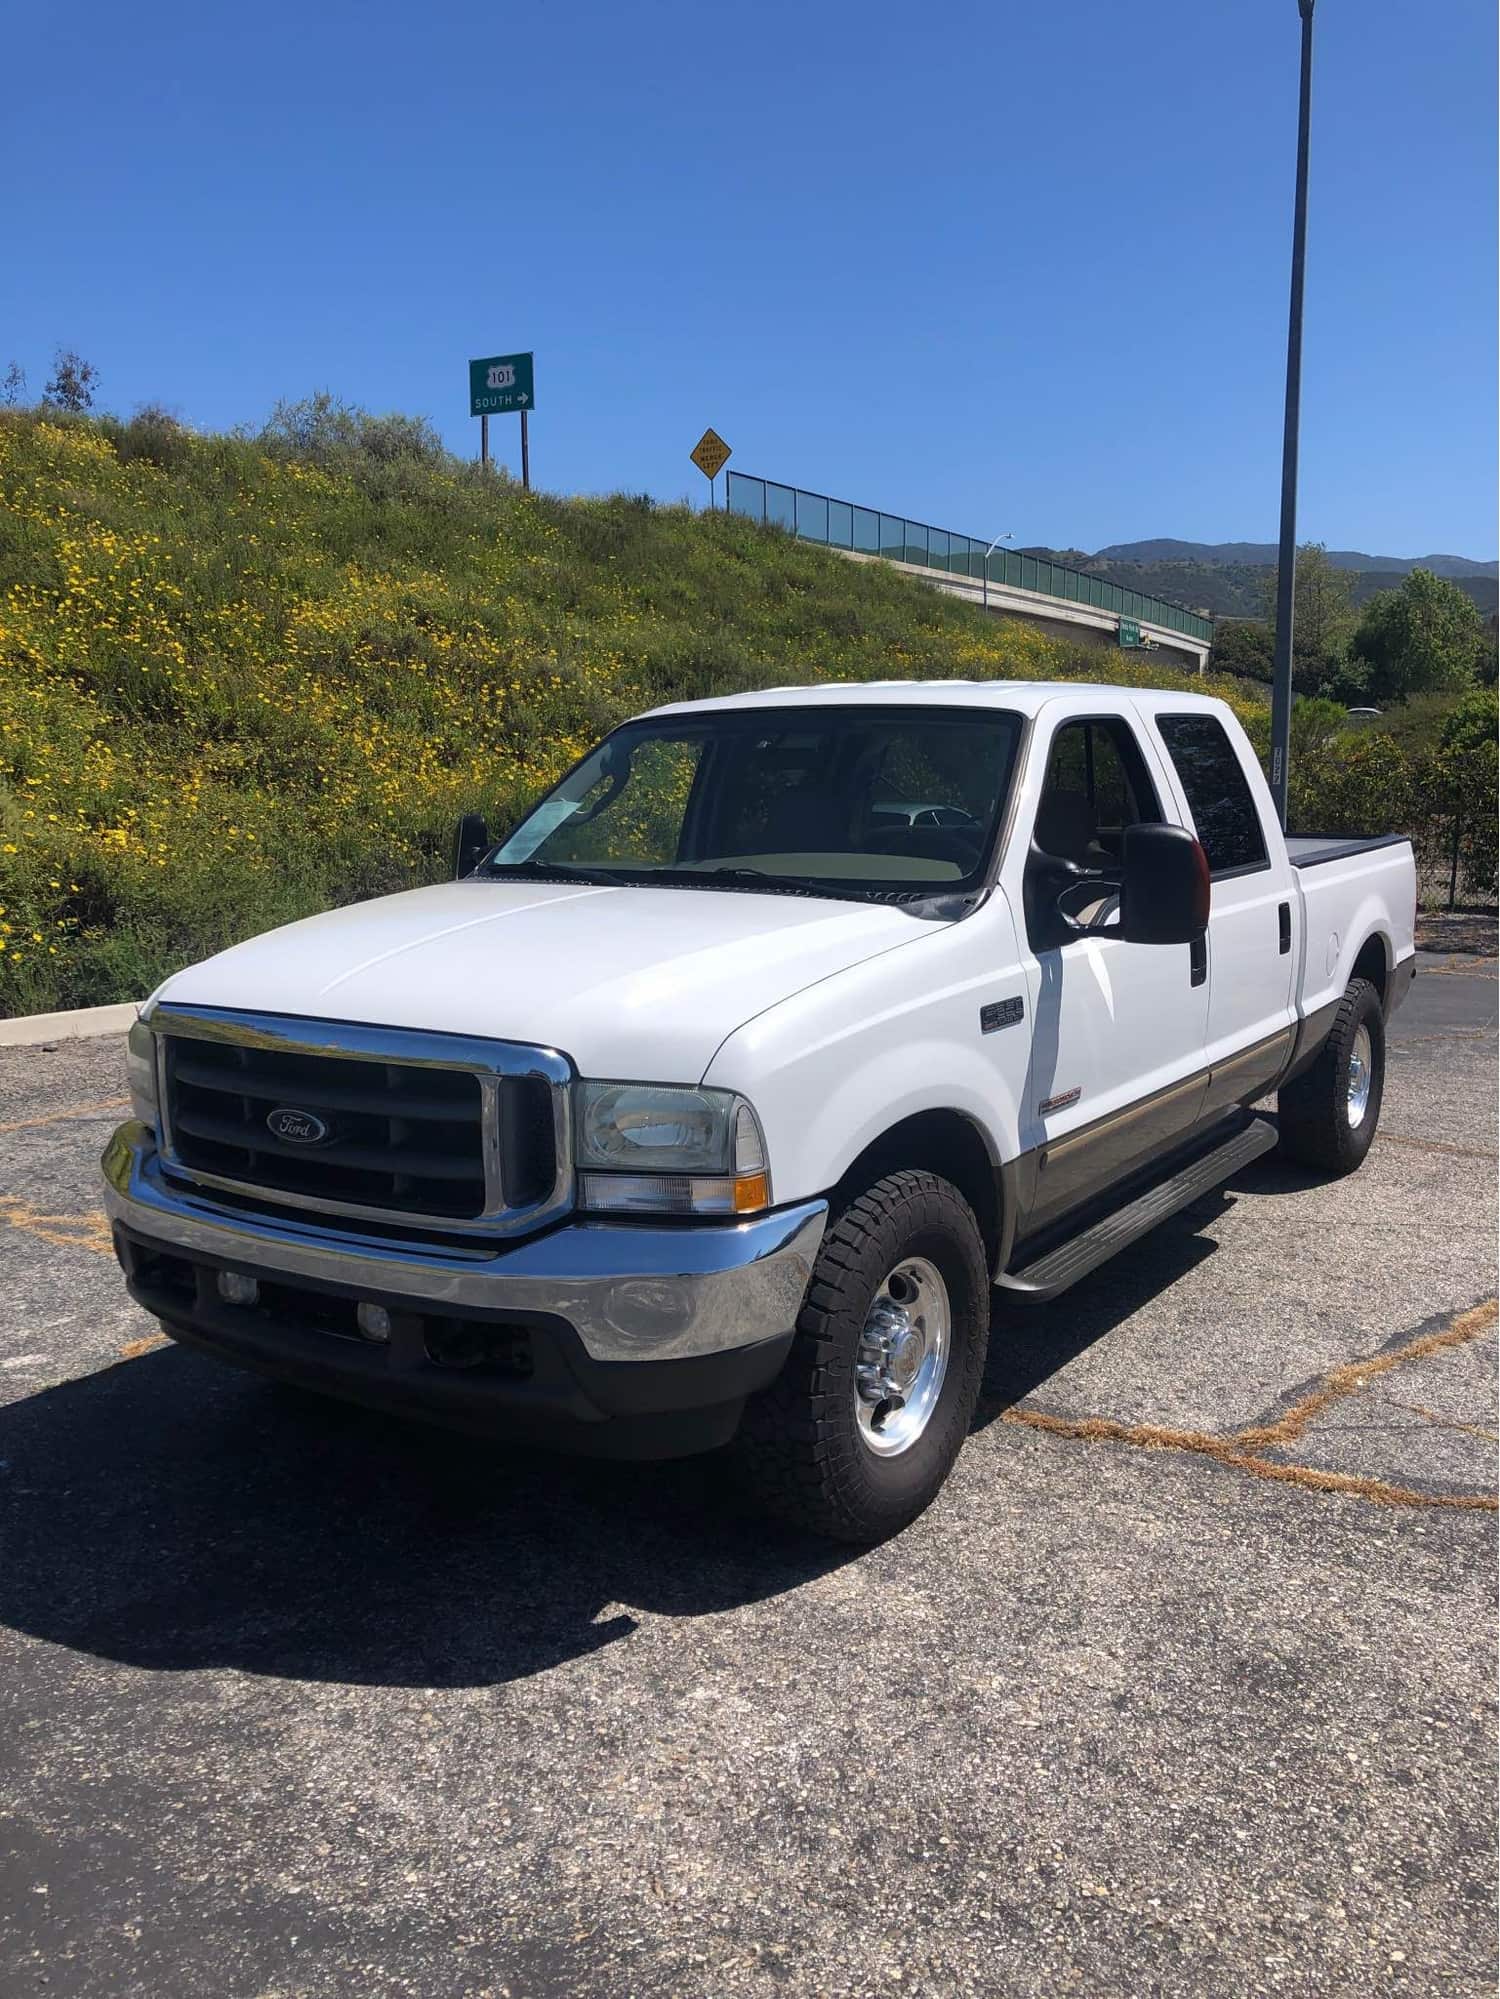 2003 Ford F-250 Super Duty - 2003 ford f250 sd 2WD 4door 6.0 diesel  short bed - Used - Newburry Park, CA 91320, United States